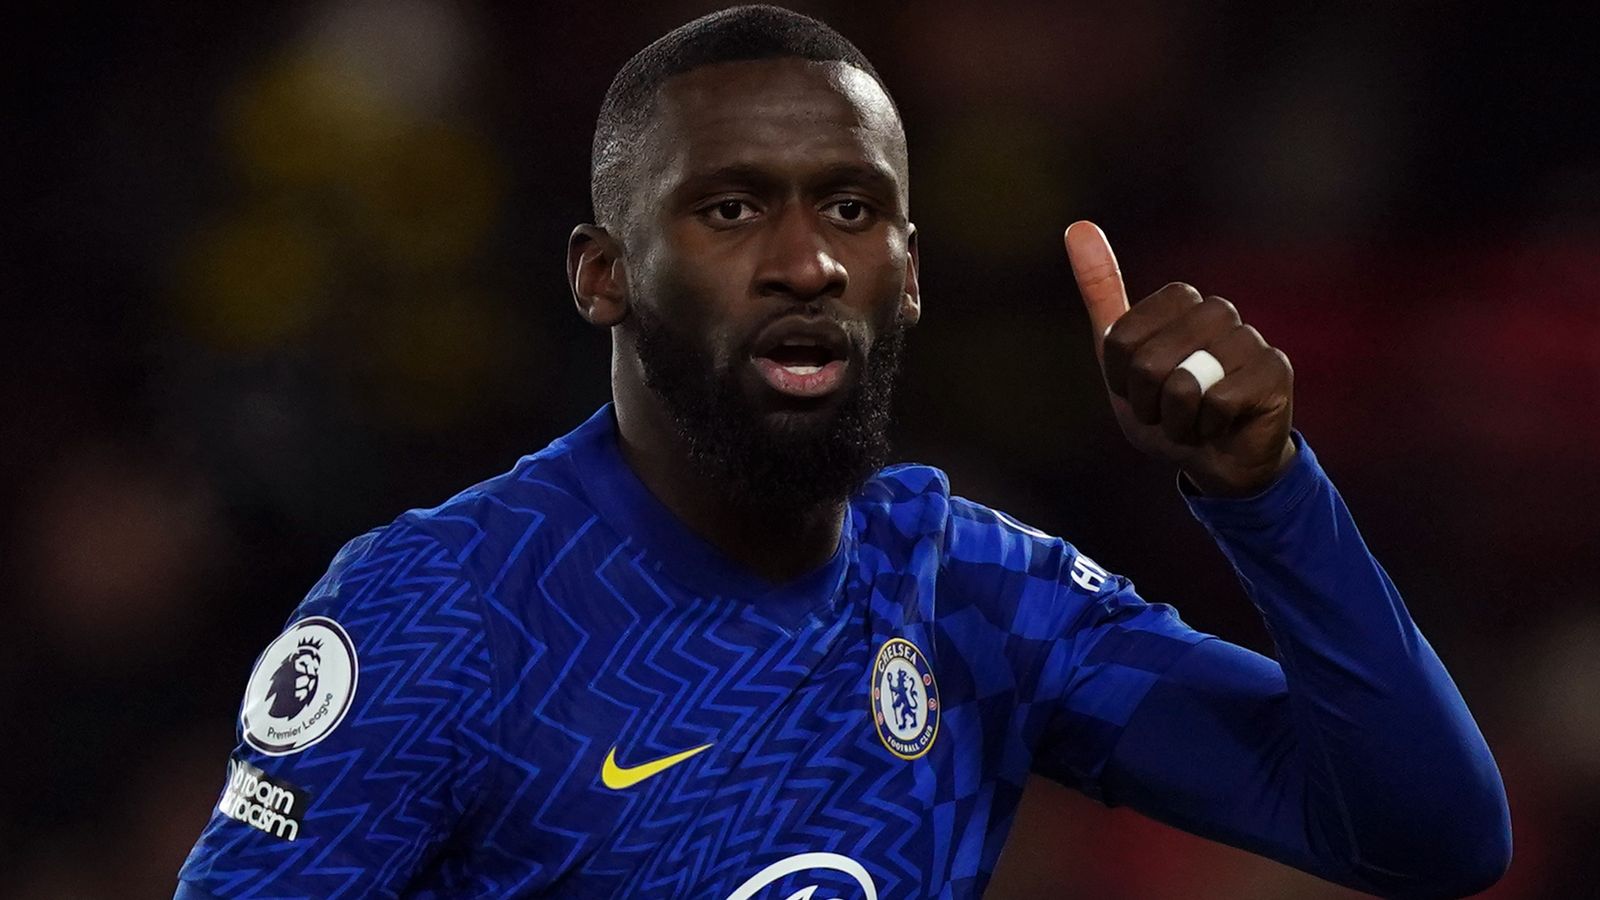 Chelsea’s Antonio Rudiger says ‘family feel great in London’ as talks continue over new contract